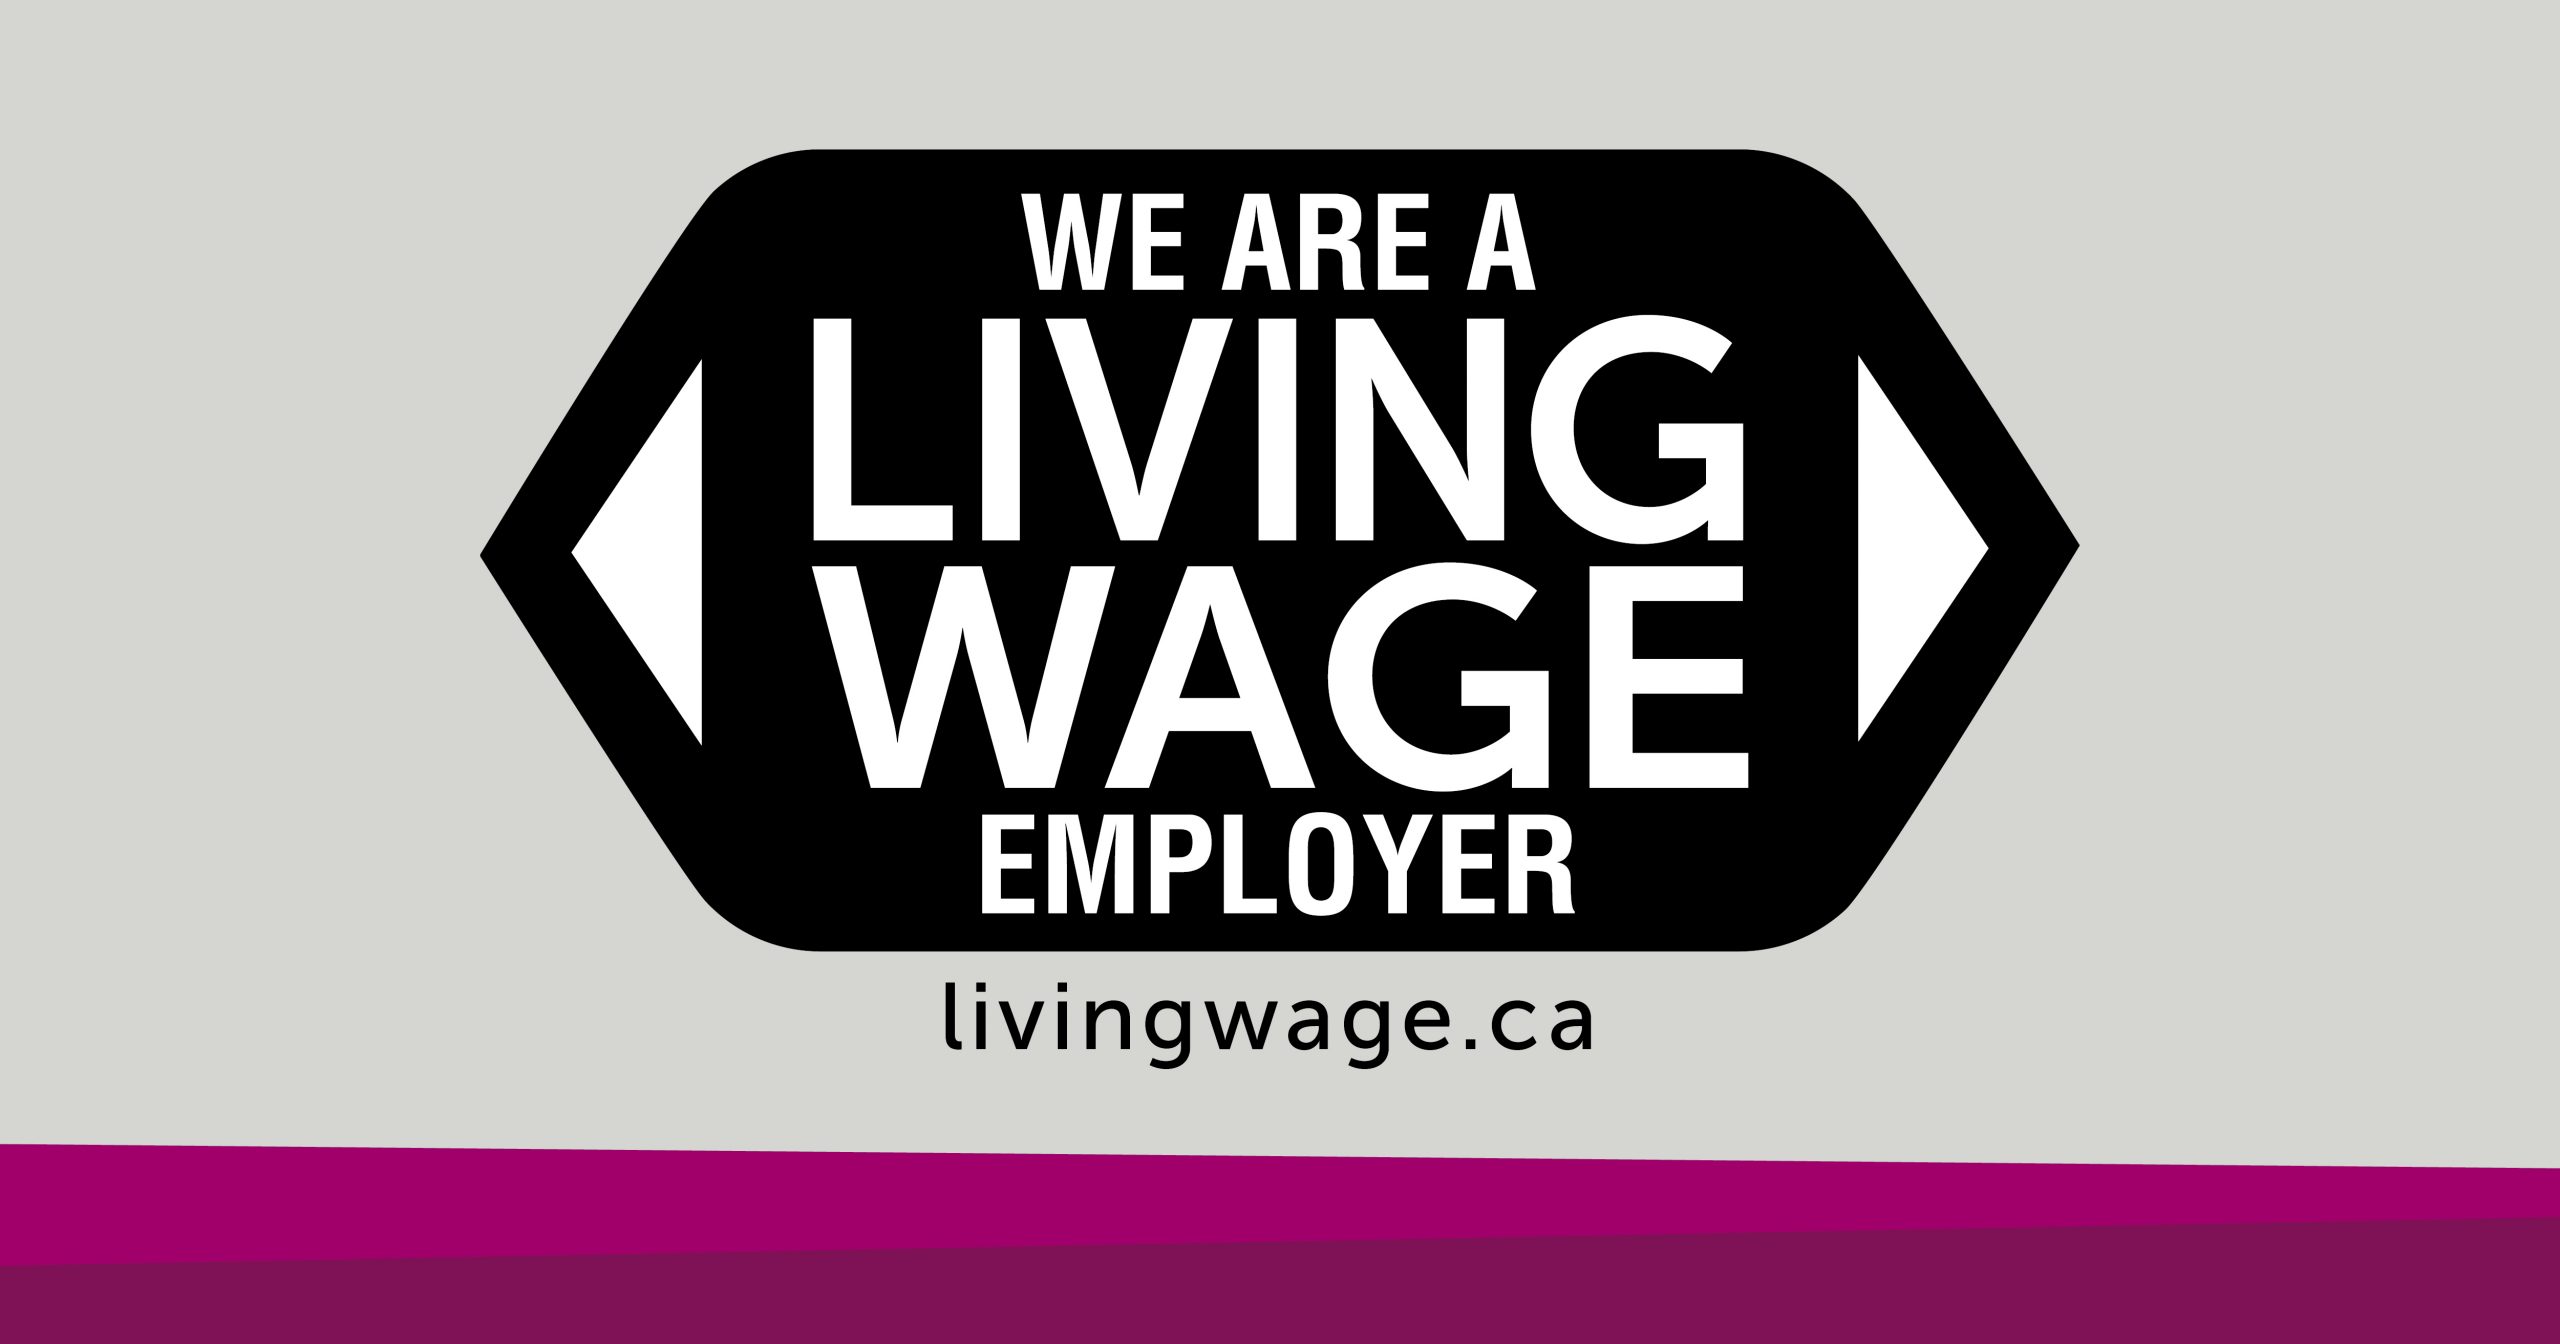 We are a living wage employer. livingwage.ca